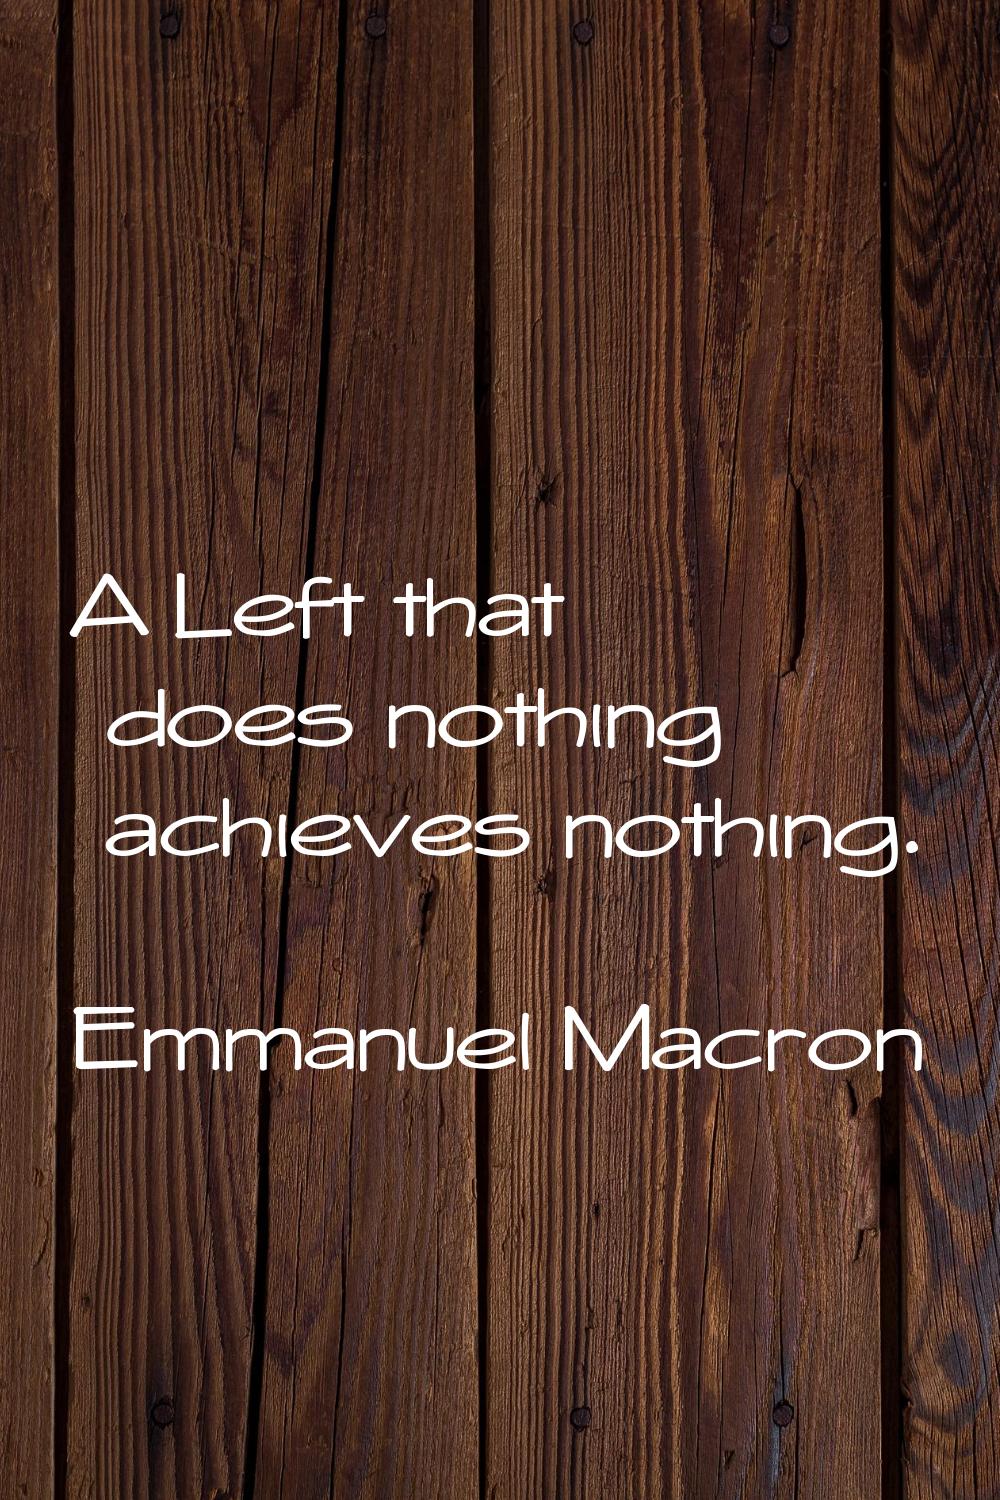 A Left that does nothing achieves nothing.